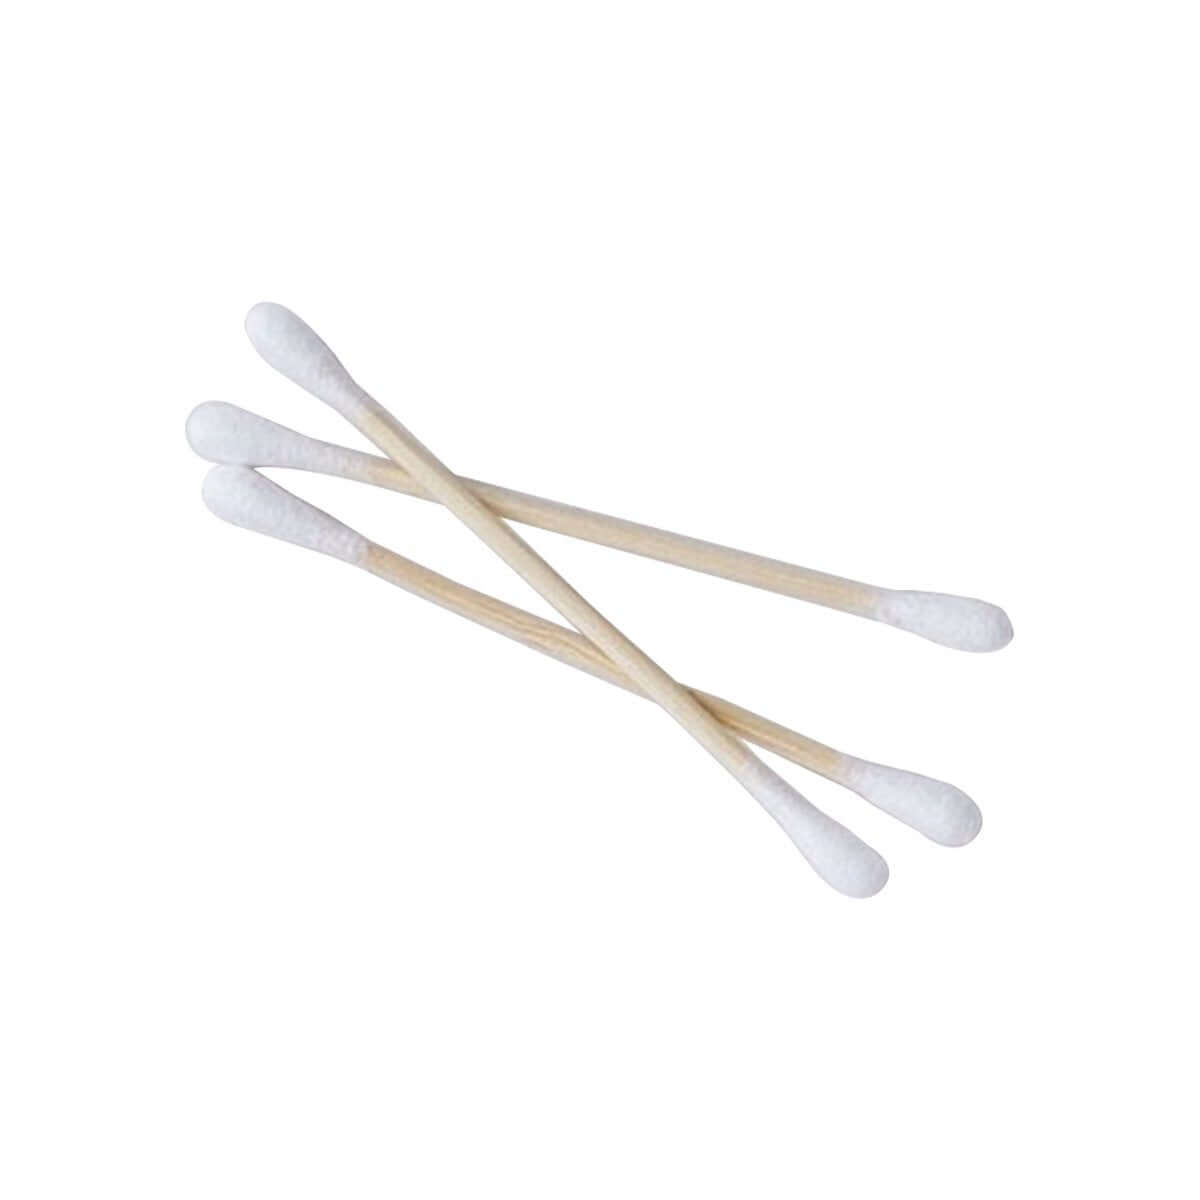 3 plastic-free cotton buds. Bamboo and cotton. Diminish.